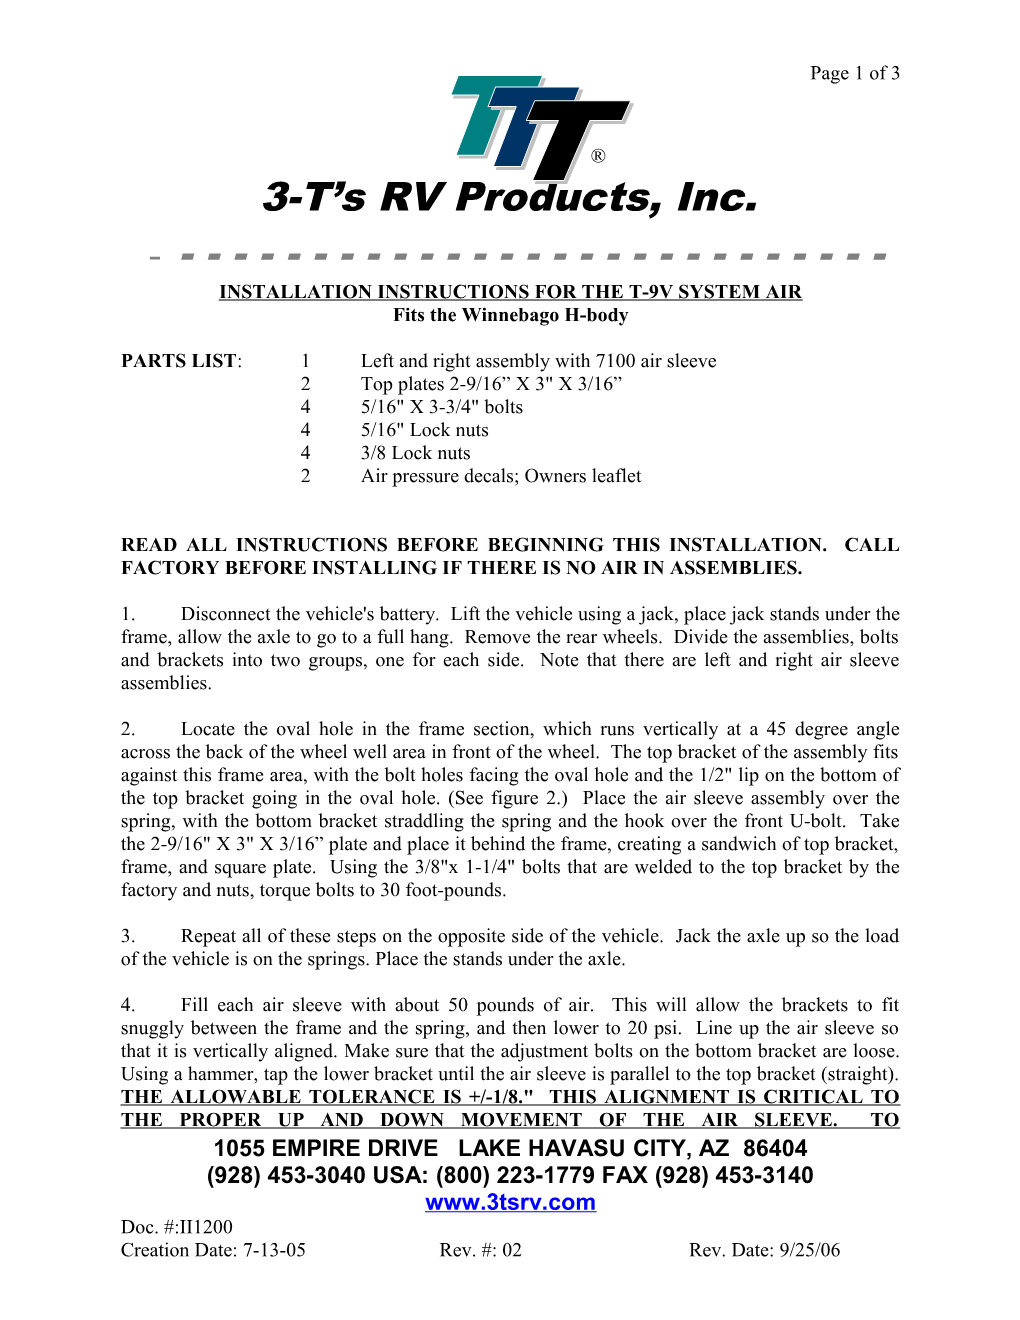 Installation Instructions for the T-9V System Air